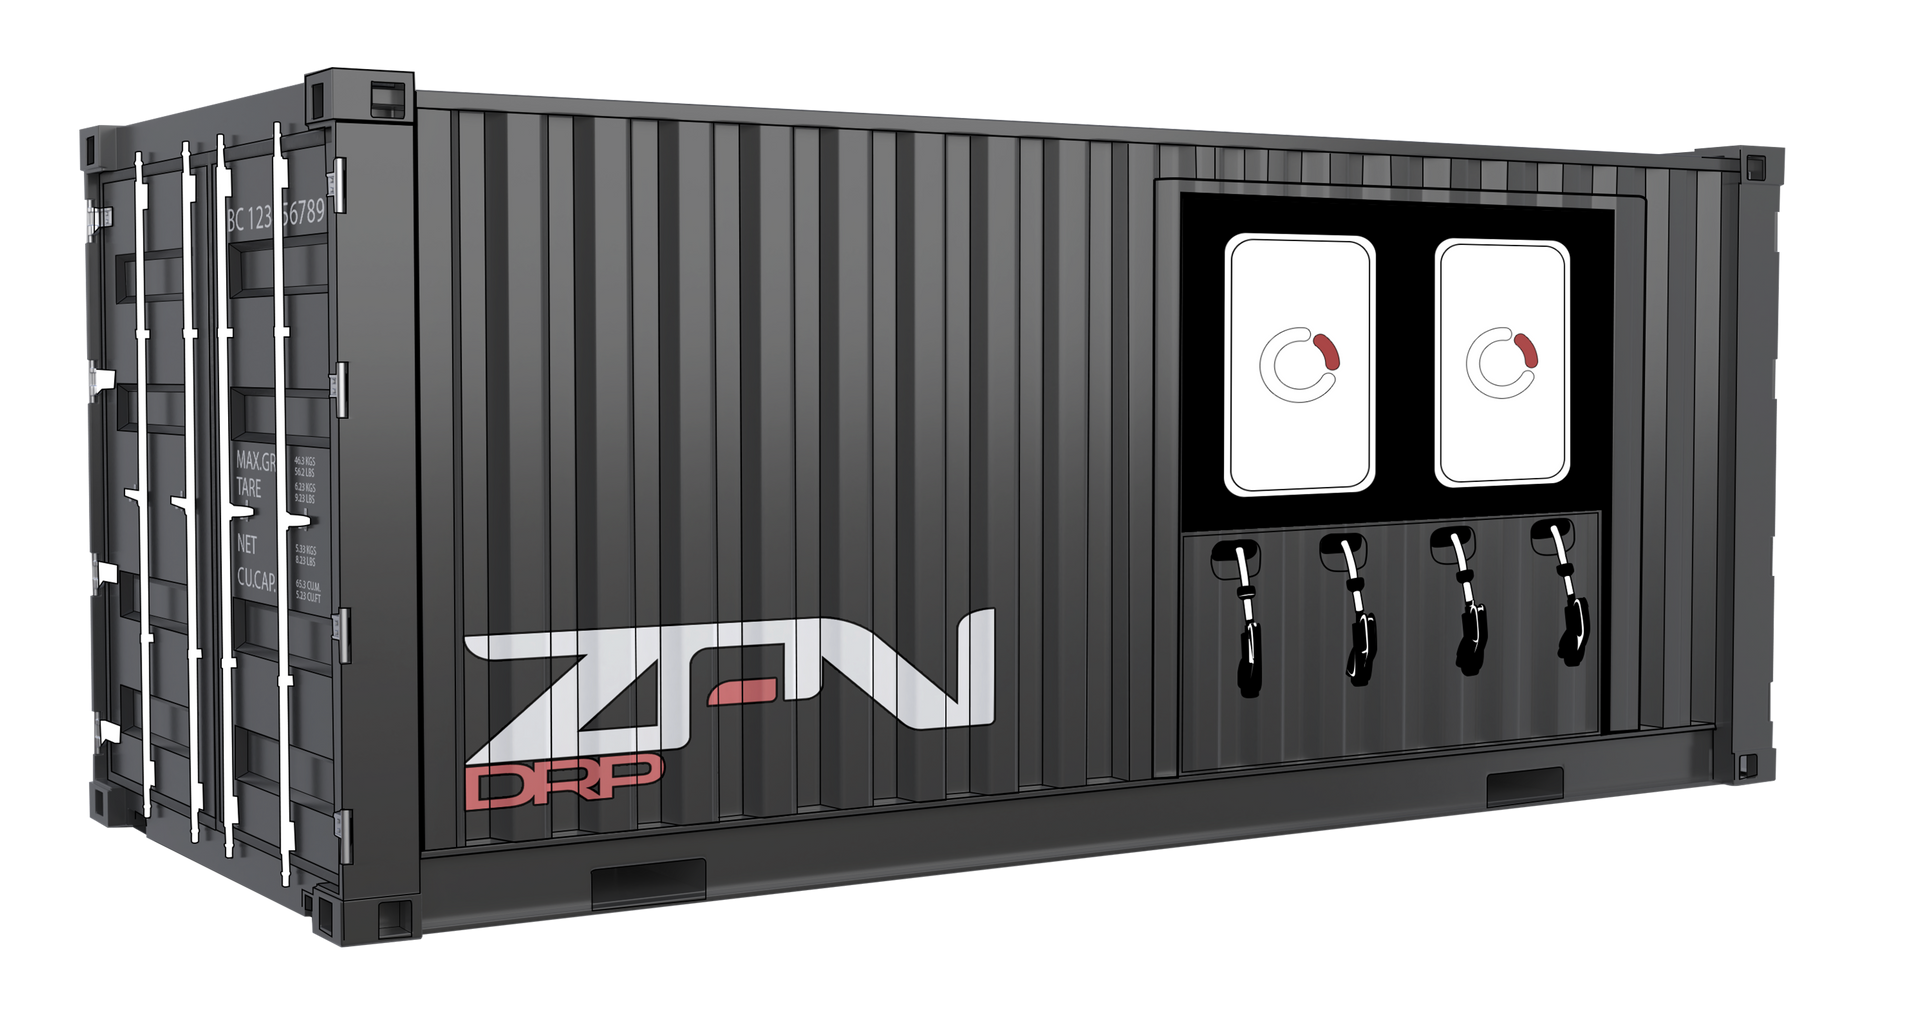 ZPN DROP portable high energy battery storage with ev charging outlets and video screen interface sat side o